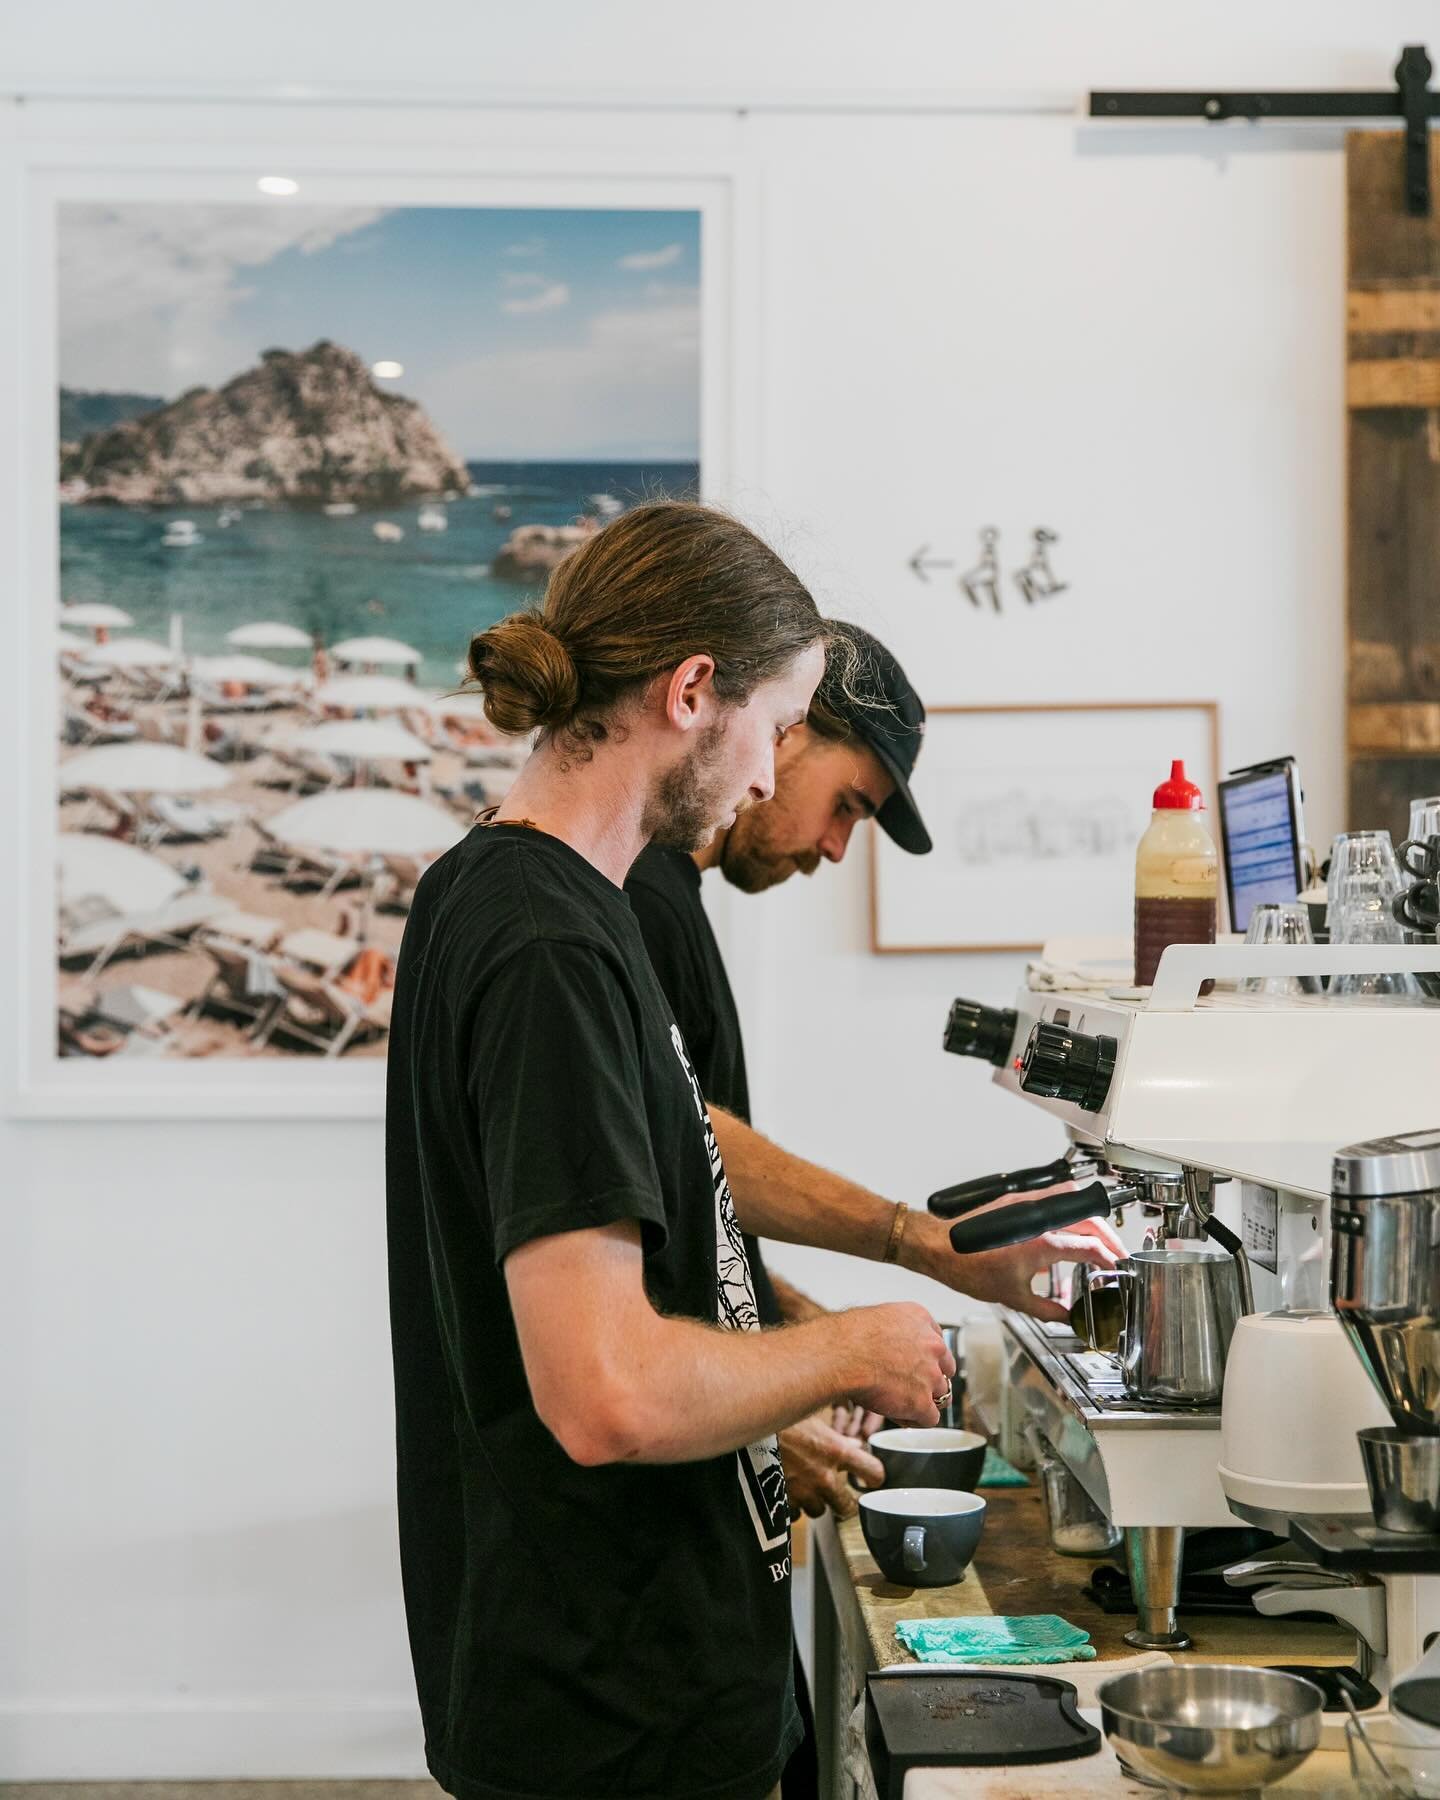 B A R I S T A S ! 

We are looking for a passionate barista to join our team! 

- Minimum 2 years experience
- Fast paced environment 
- casual position
- Team player
- Customer service focused 

Please email your cv to hello@vanillafood.com.au